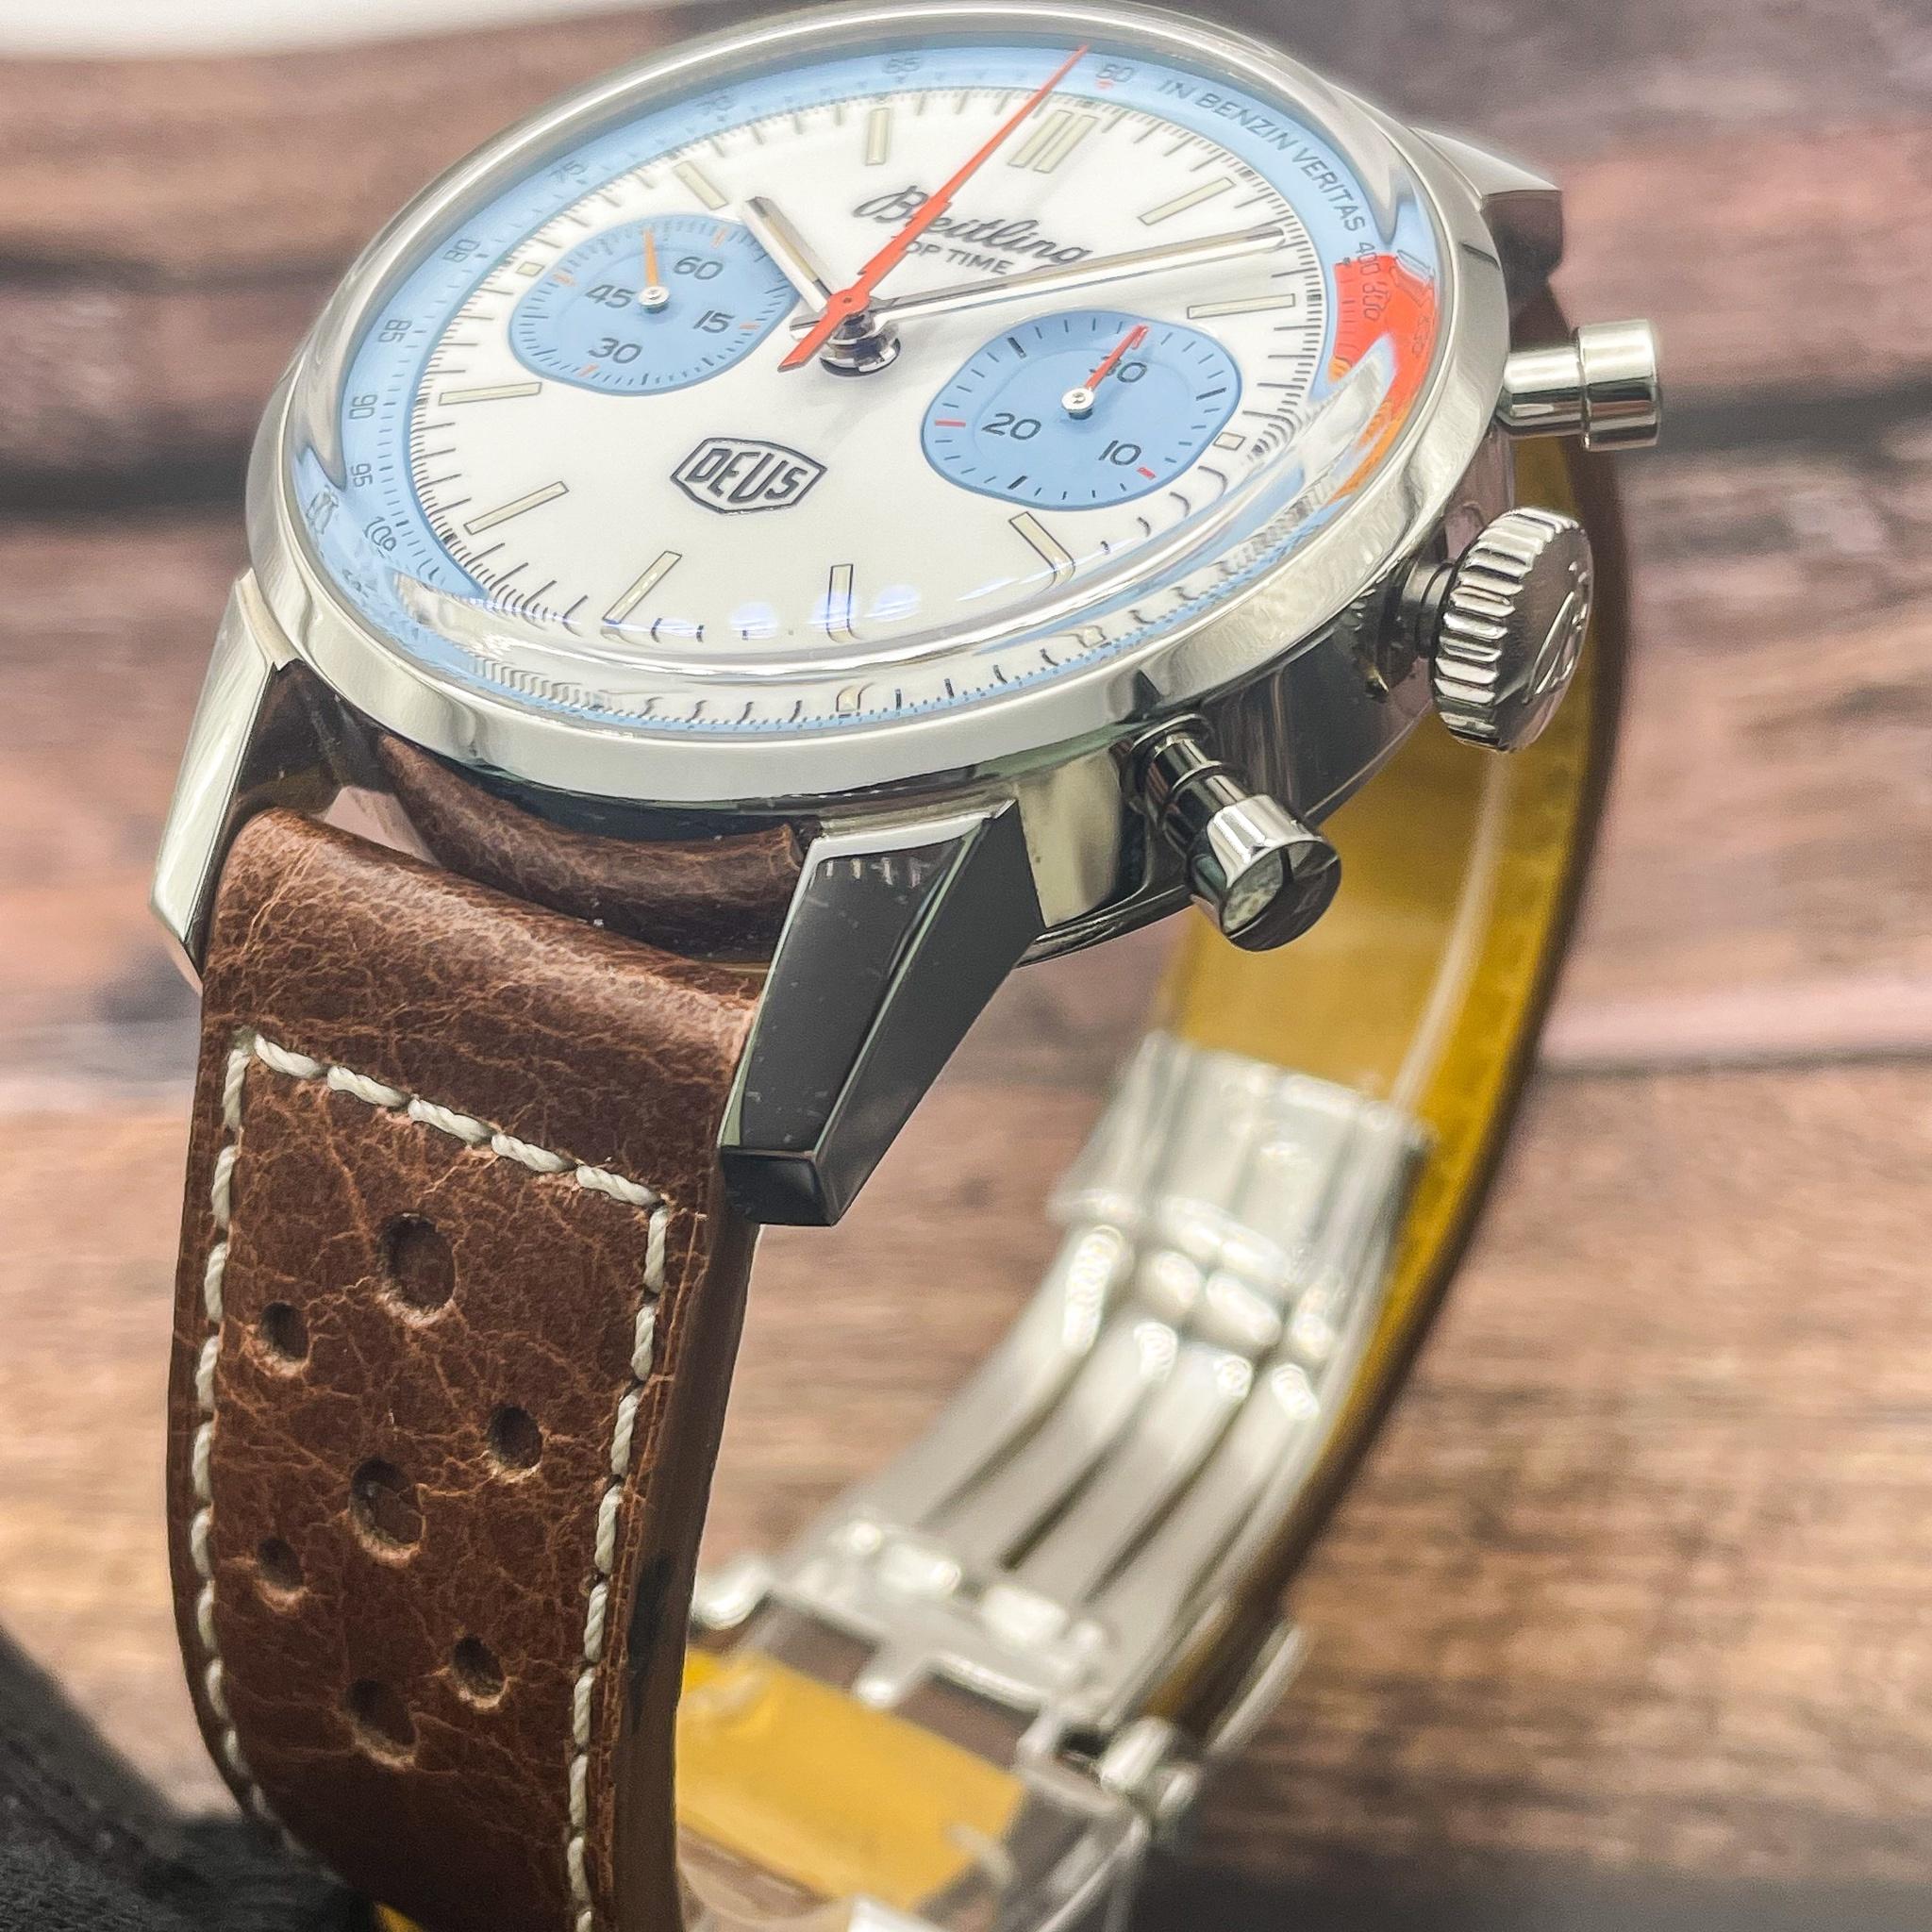 WTS] BRAND NEW Breitling Top Time Deus Limited Edition w/ Merch